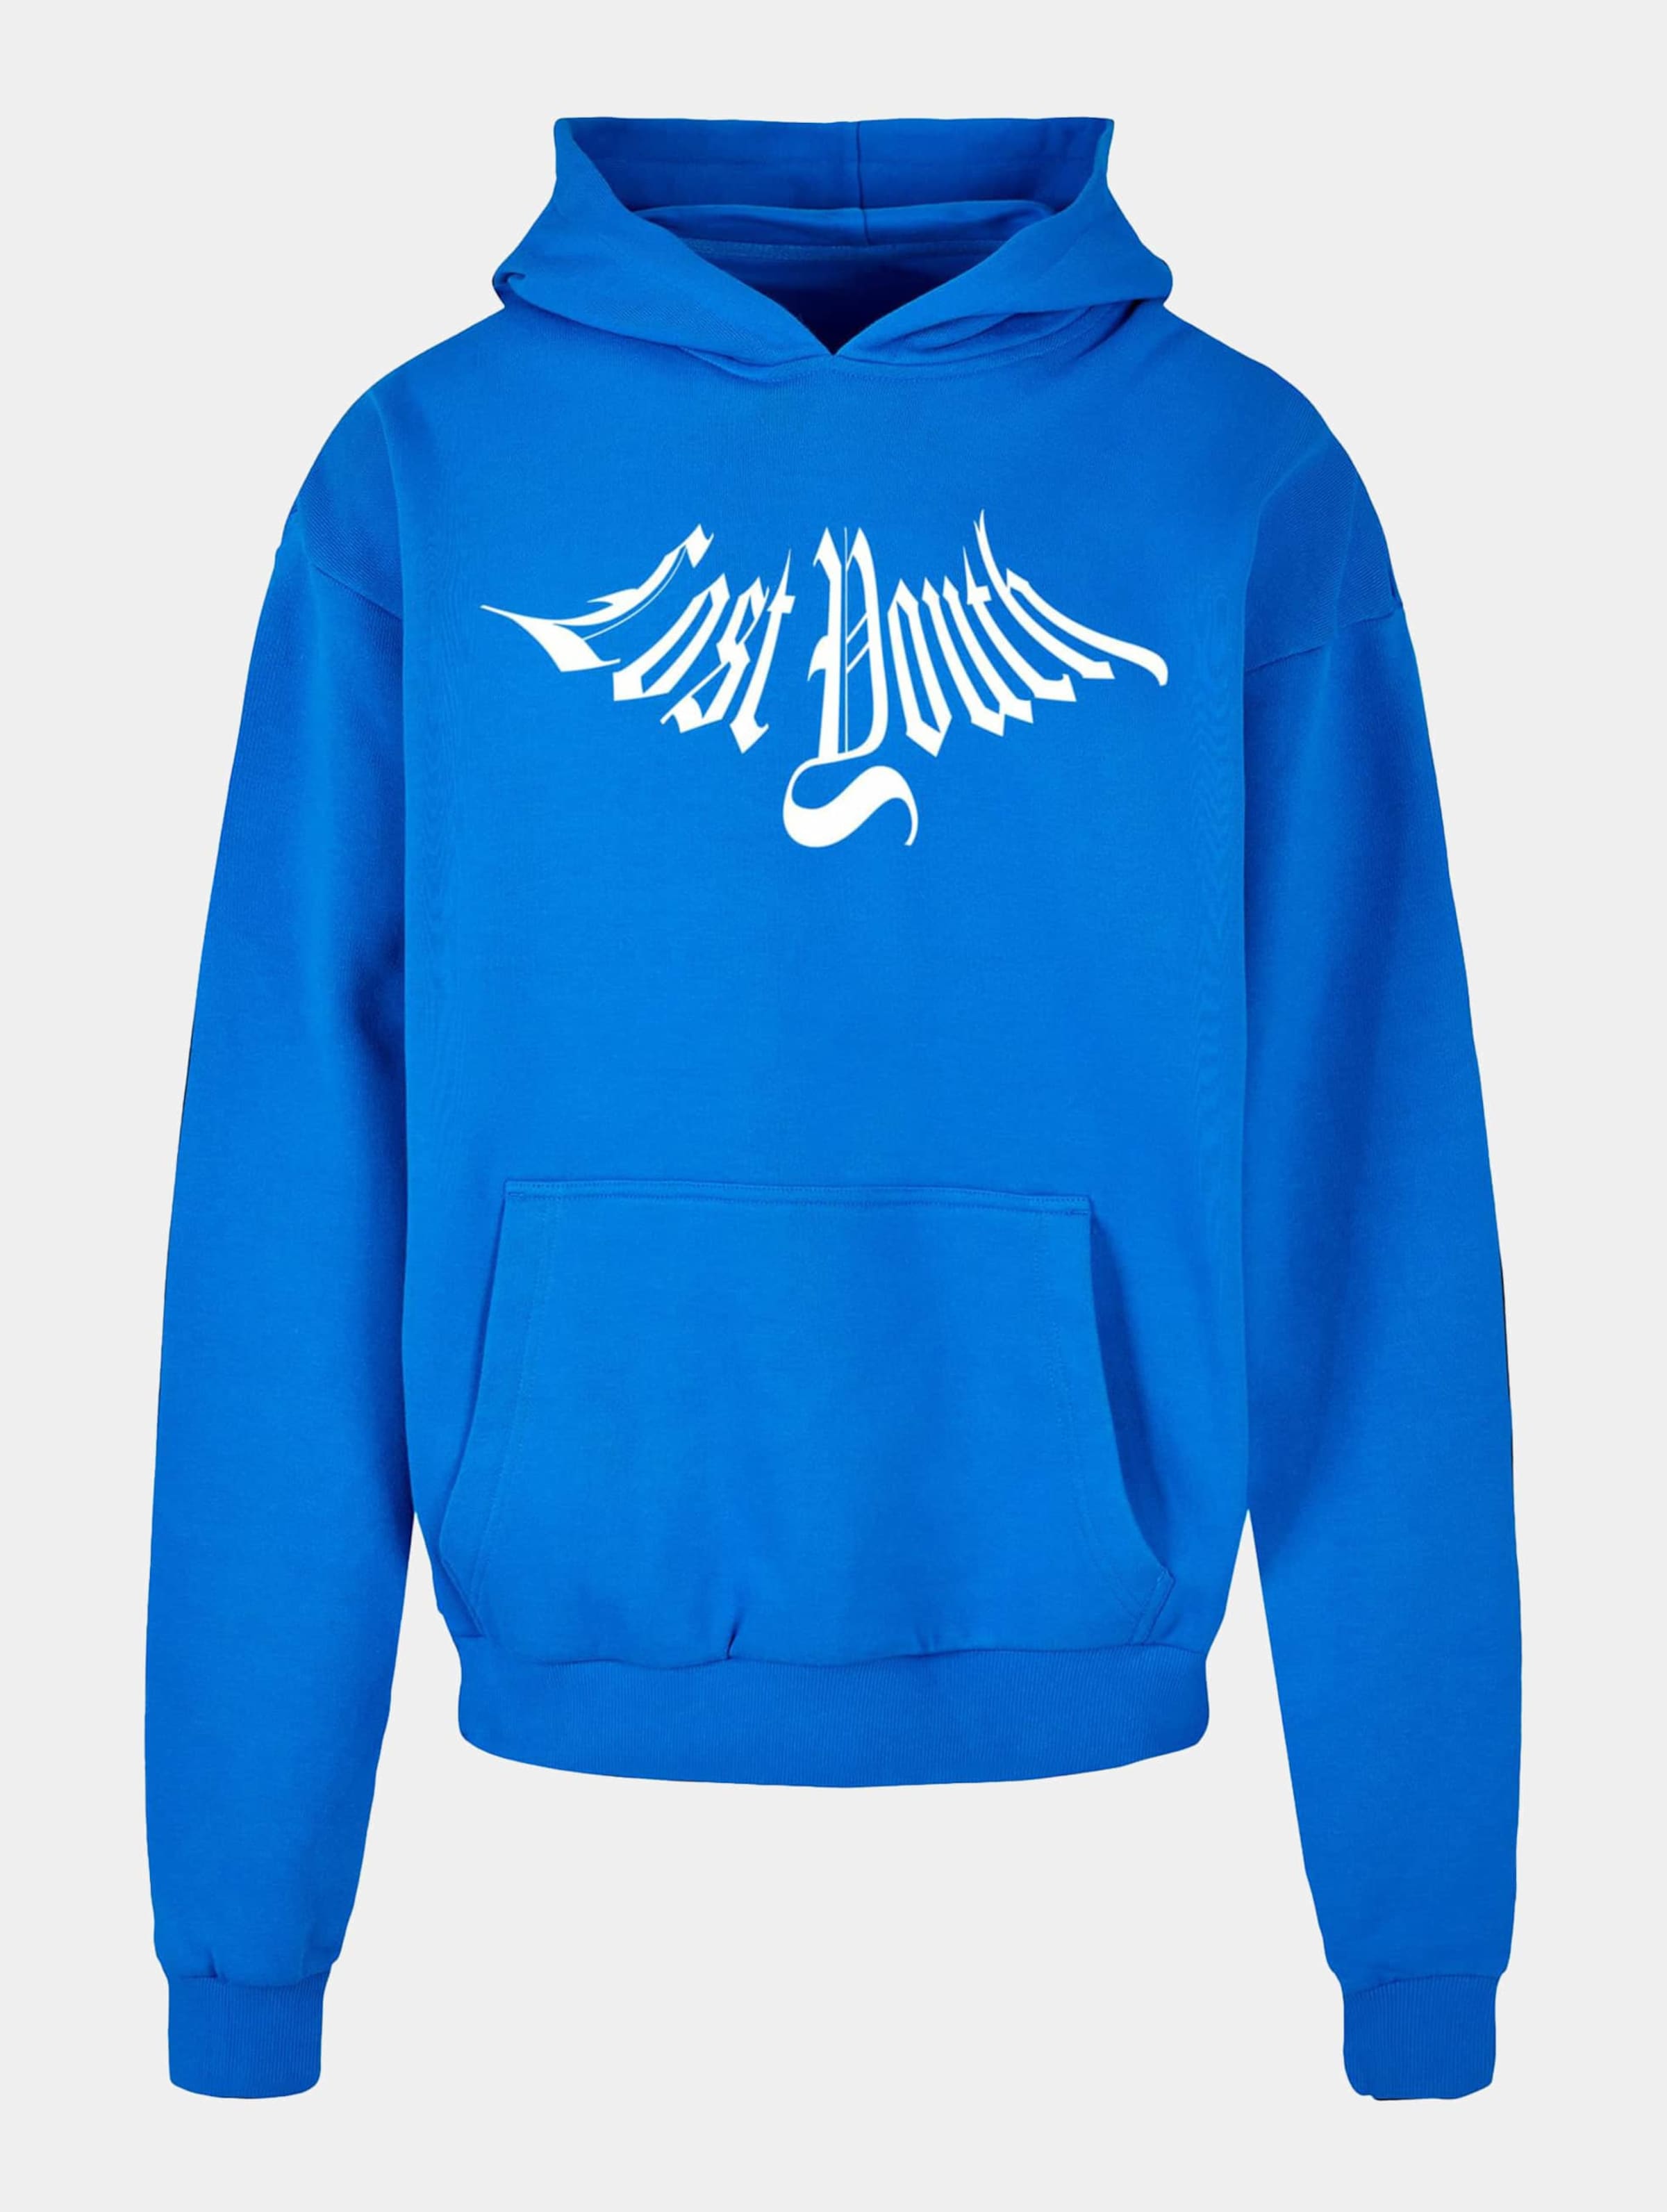 Lost Youth LY HOODIE CLASSIC V.3 Mannen op kleur blauw, Maat L